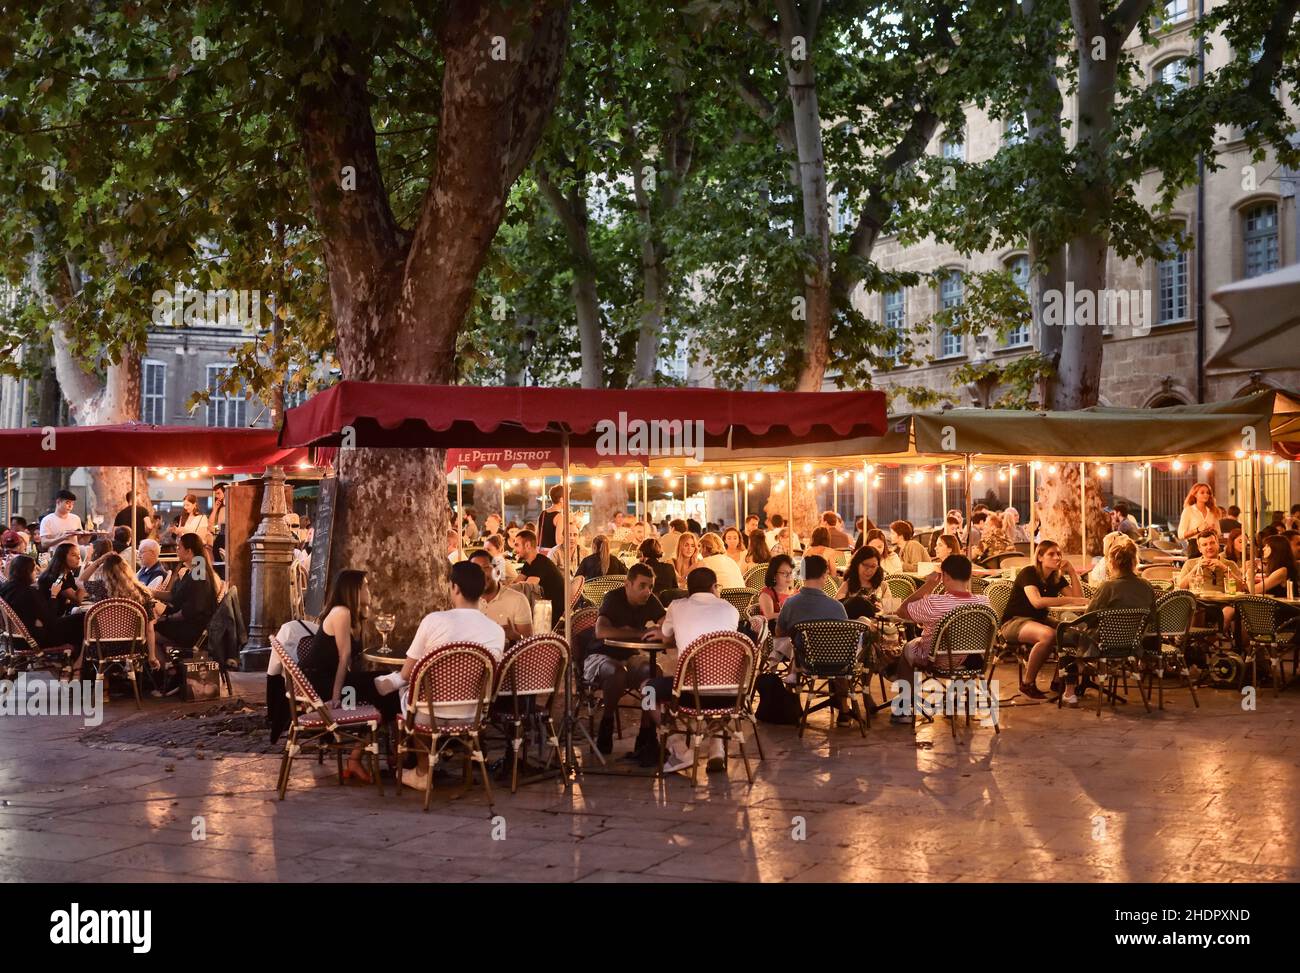 Restaurant terrace busy with people in Aix-en-Provence, Southern France. Restaurant tables illuminated with lights in the evening. Aix, Provence, Sout Stock Photo